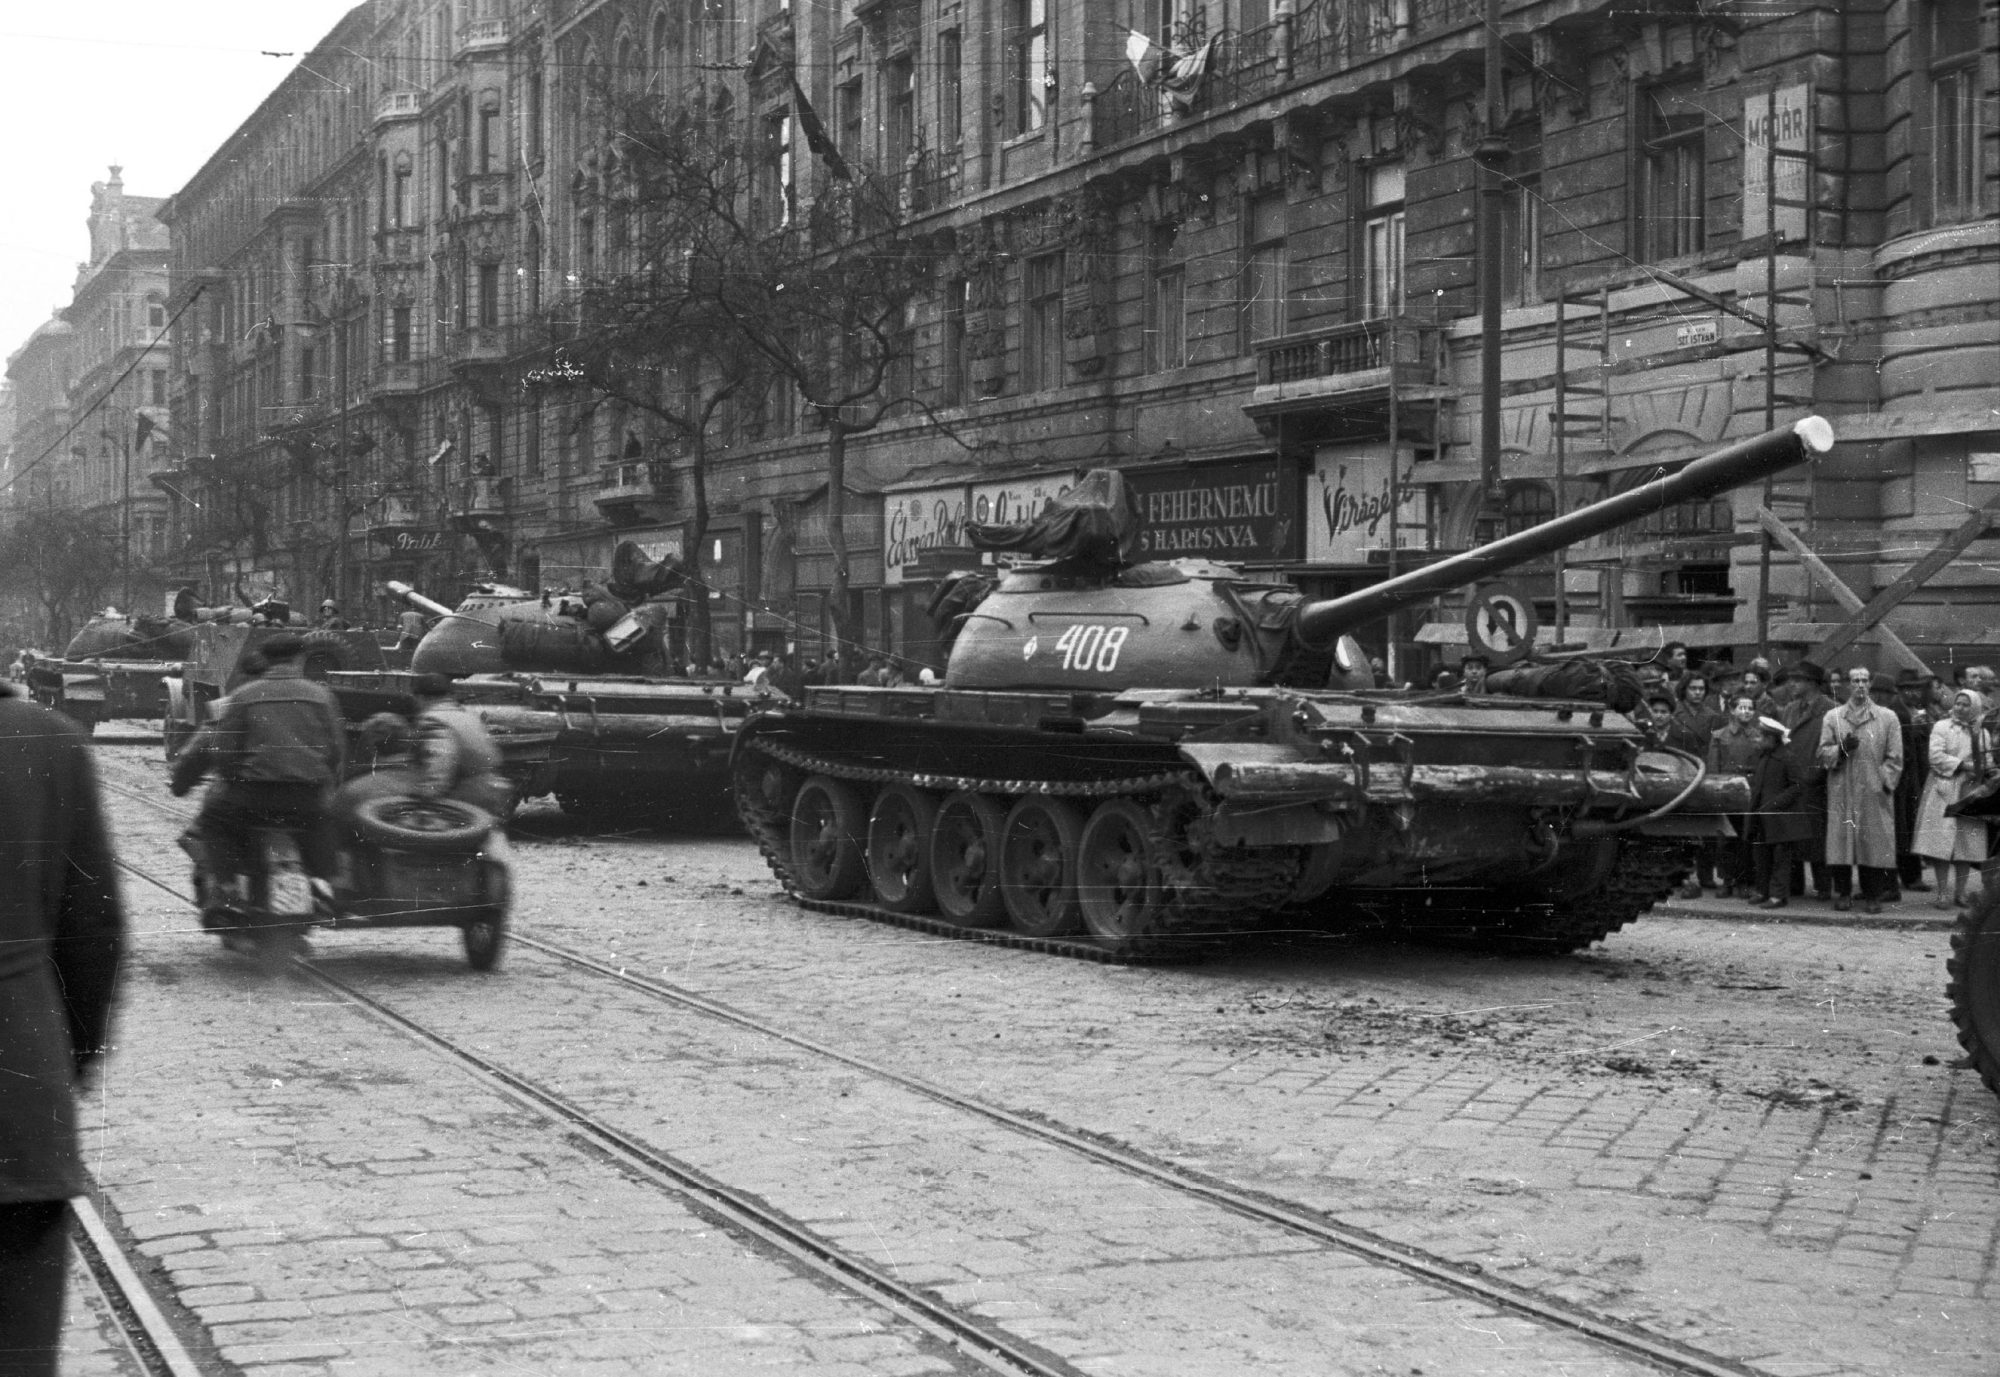 Read more about Soviet tanks on the streets of Budapest, where Laszlo’s family remained, when revolution came to Hungary in 1956 Credit: FOTO:FORTEPAN / Nagy Gyula